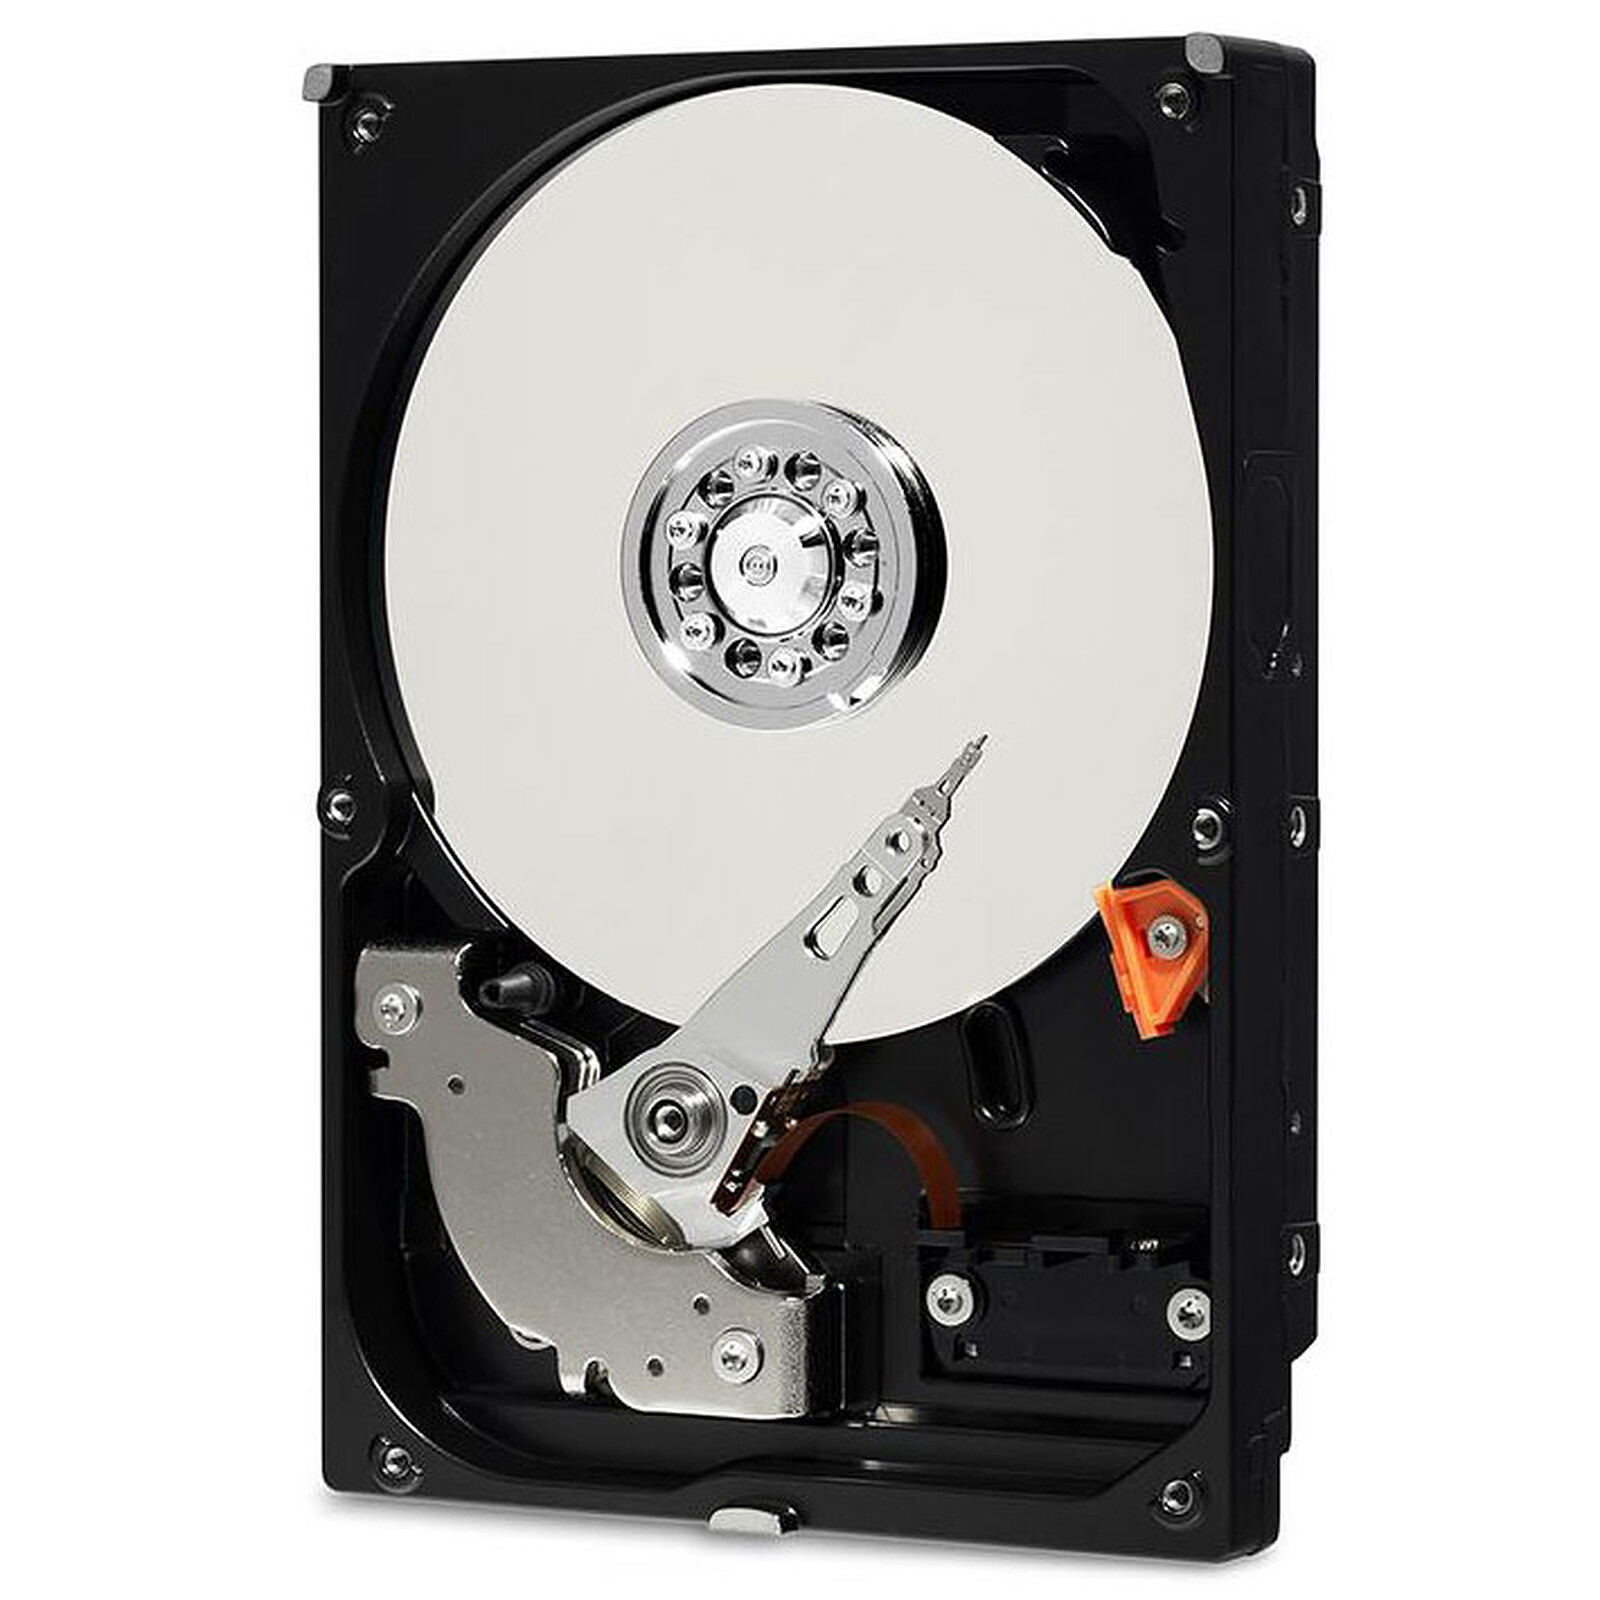 Seagate IronWolf 4 To (ST4000VN006) - Disque dur interne - LDLC